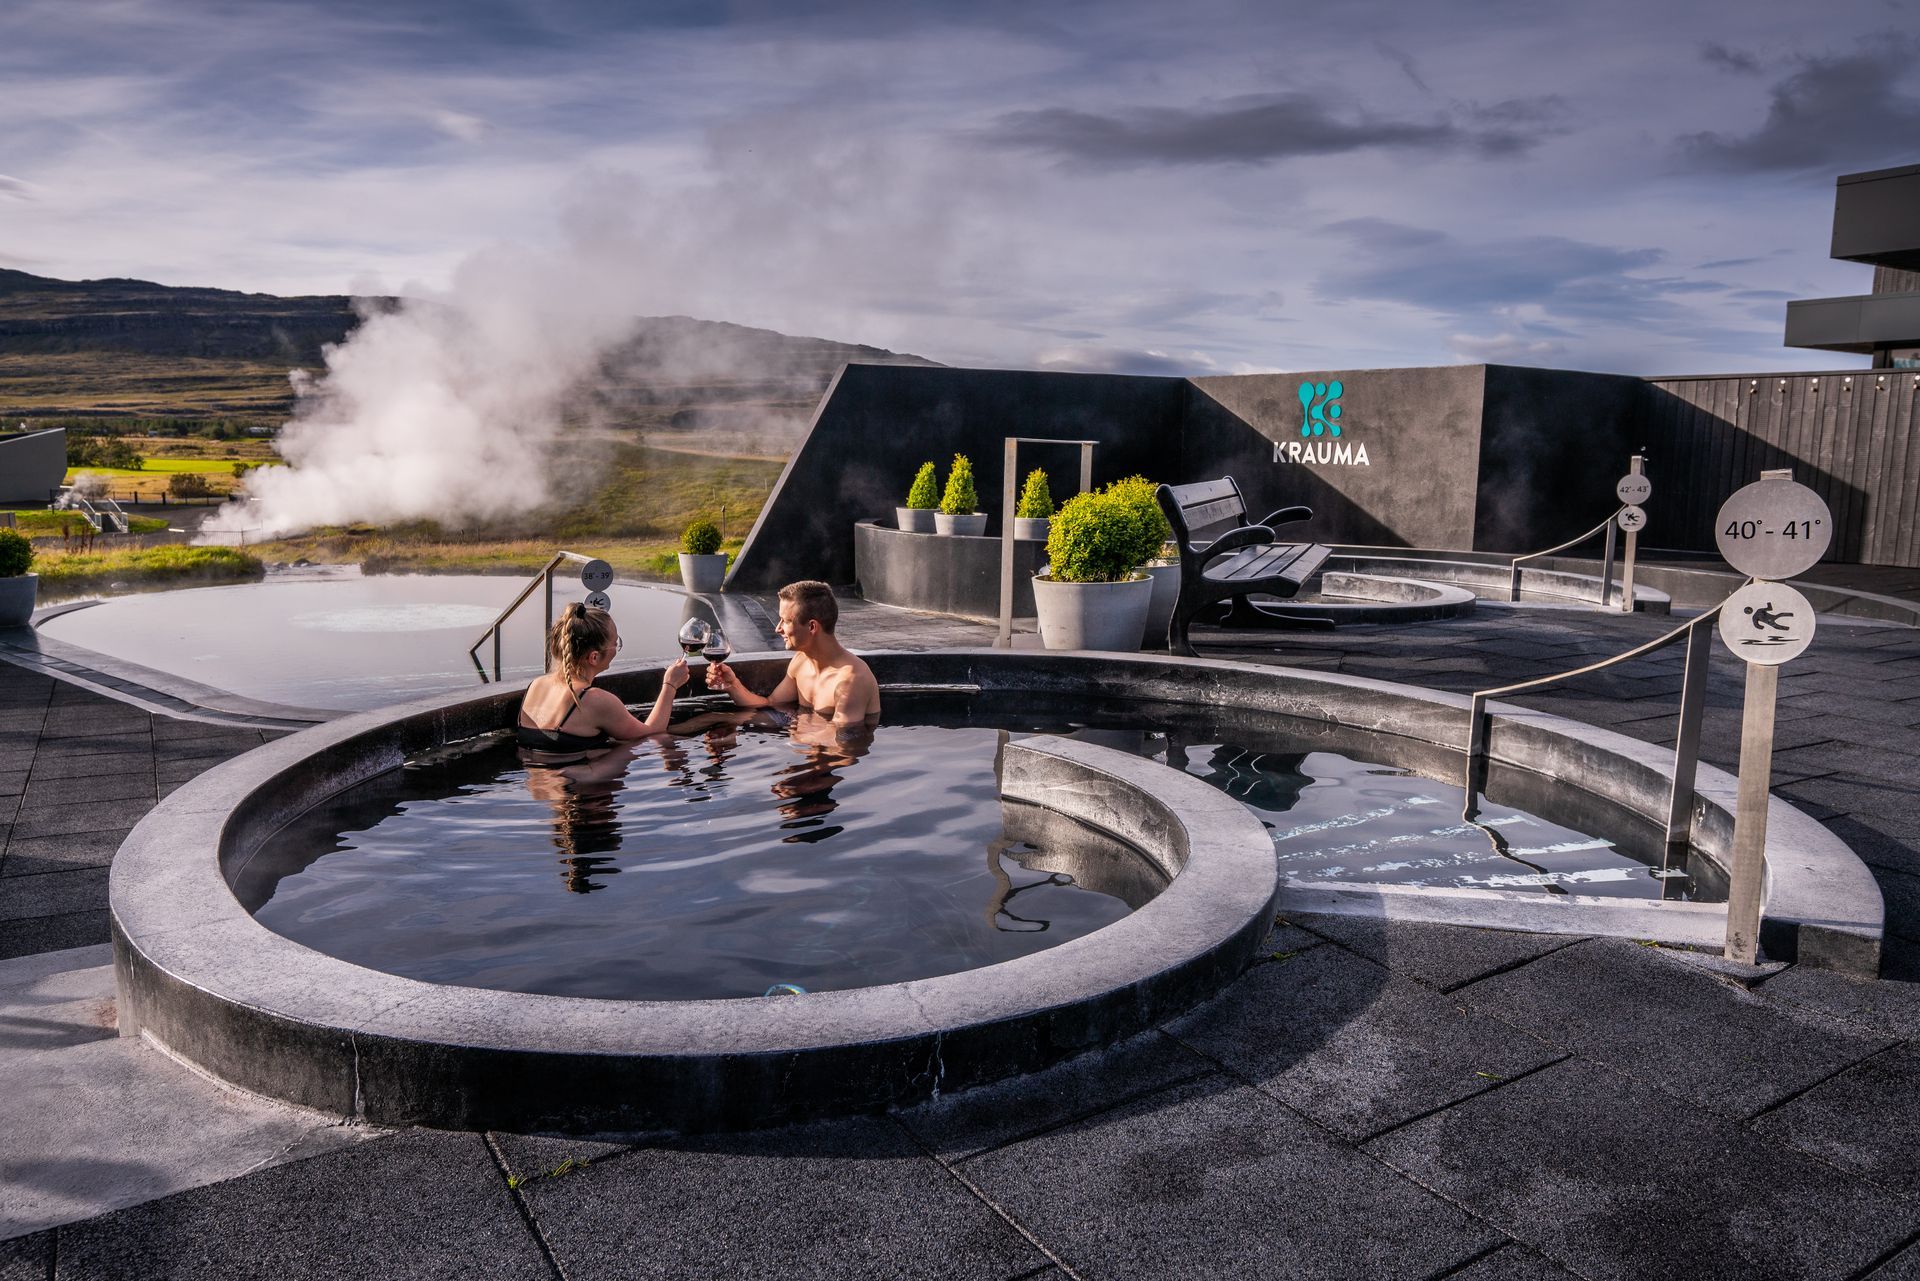 A couple sitting in the geothermal pools at Krauma